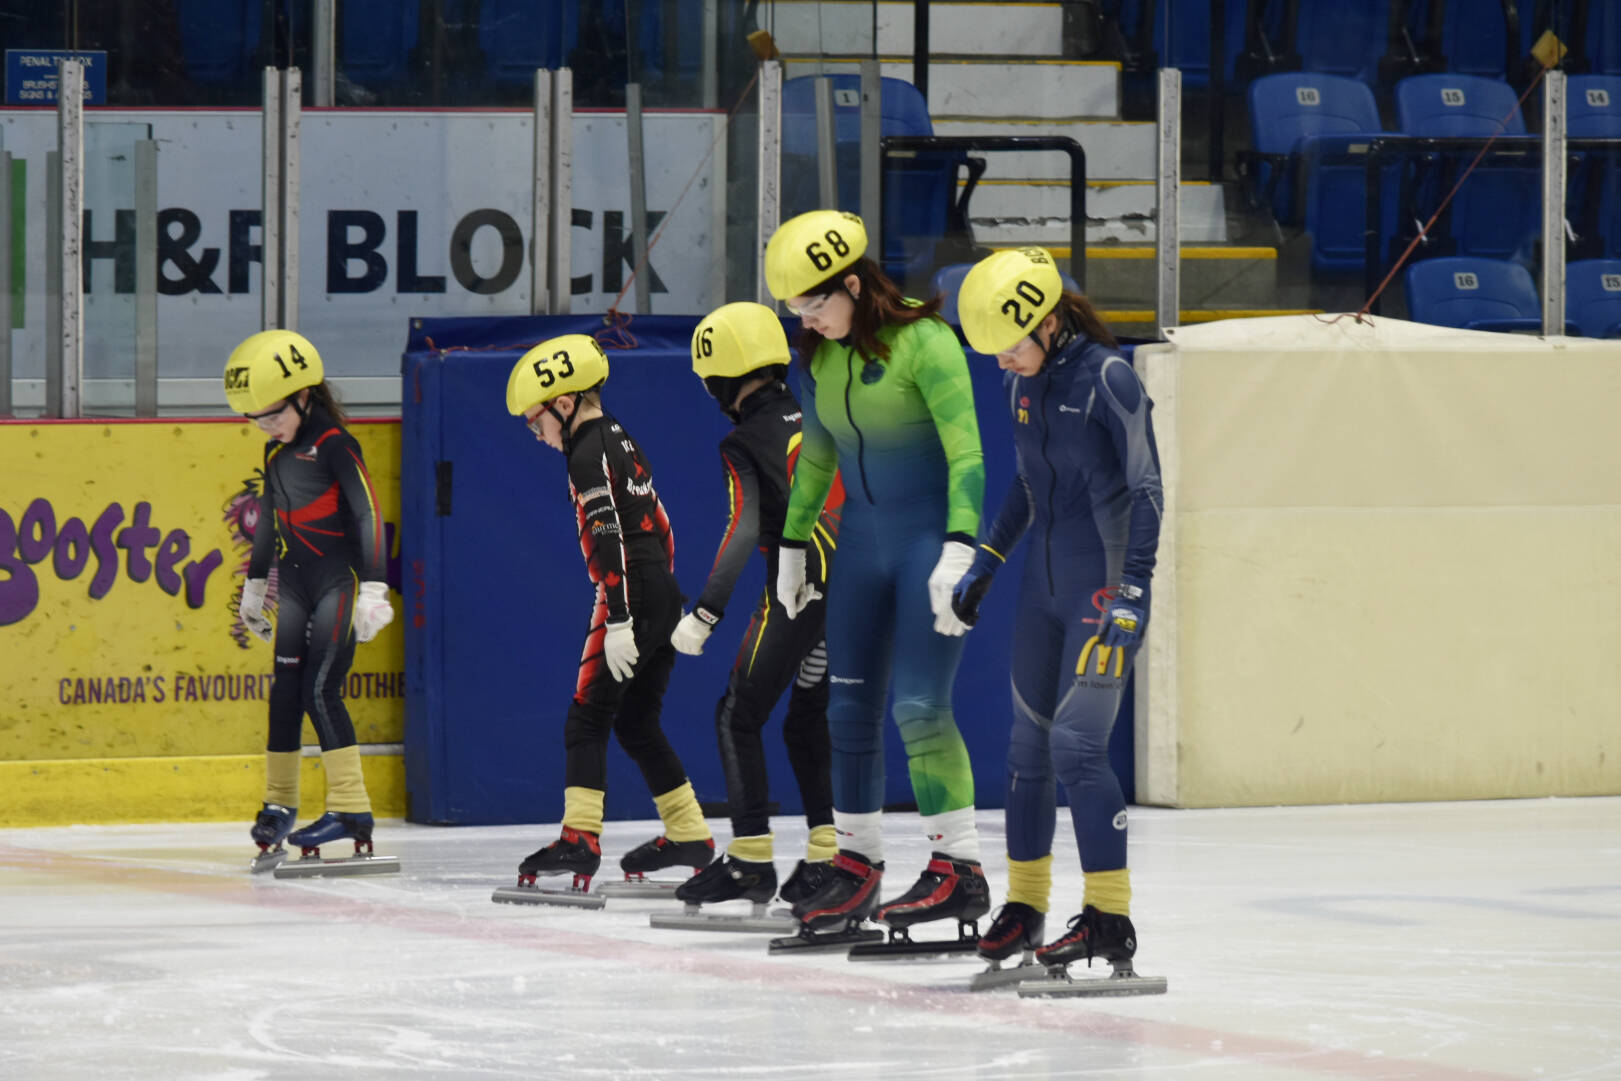 Child/ Pre-youth division speed skaters Mykenzie Acton from Kelowna, Callum Fleming from Salmon Arm, Harrison Wiebe from Kelowna, Kara Fortin from Williams Lake and Taylor Hughes from Kelowna line up to race at the Salmon Arm Interior FUNale competition, Feb. 11, 2023. (Rebecca Willson- Salmon Arm Observer)